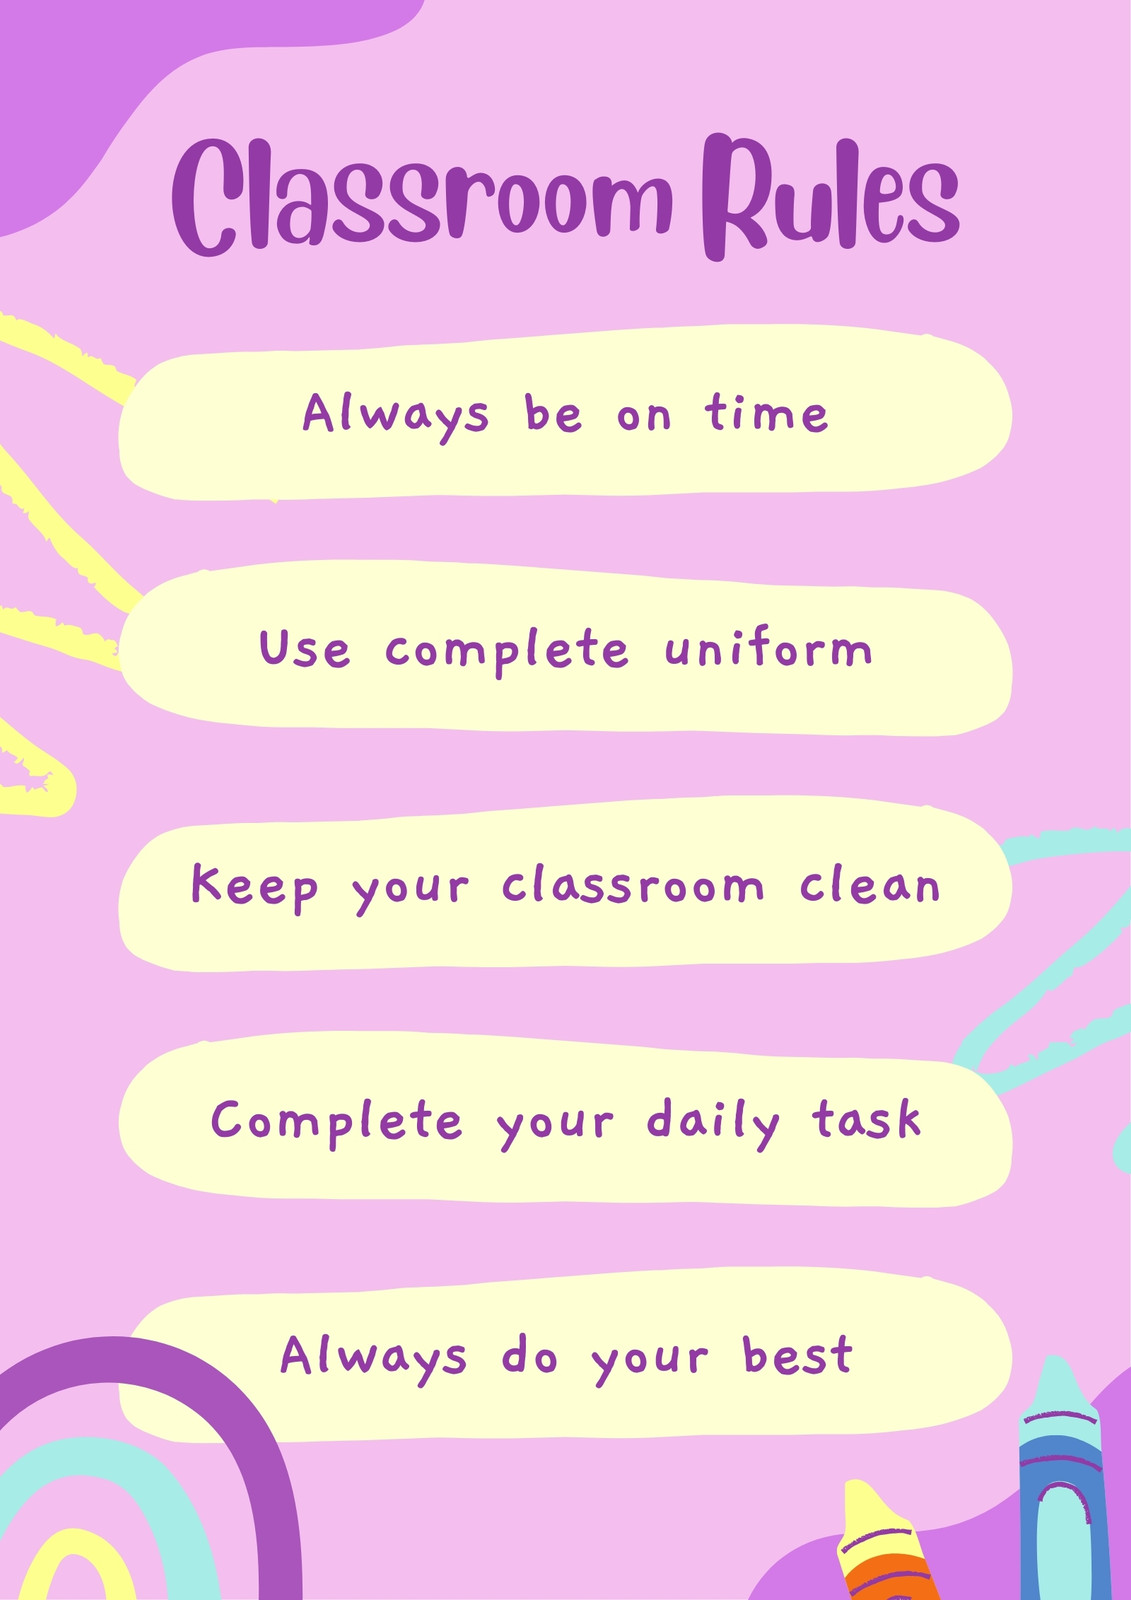 school rules poster templates